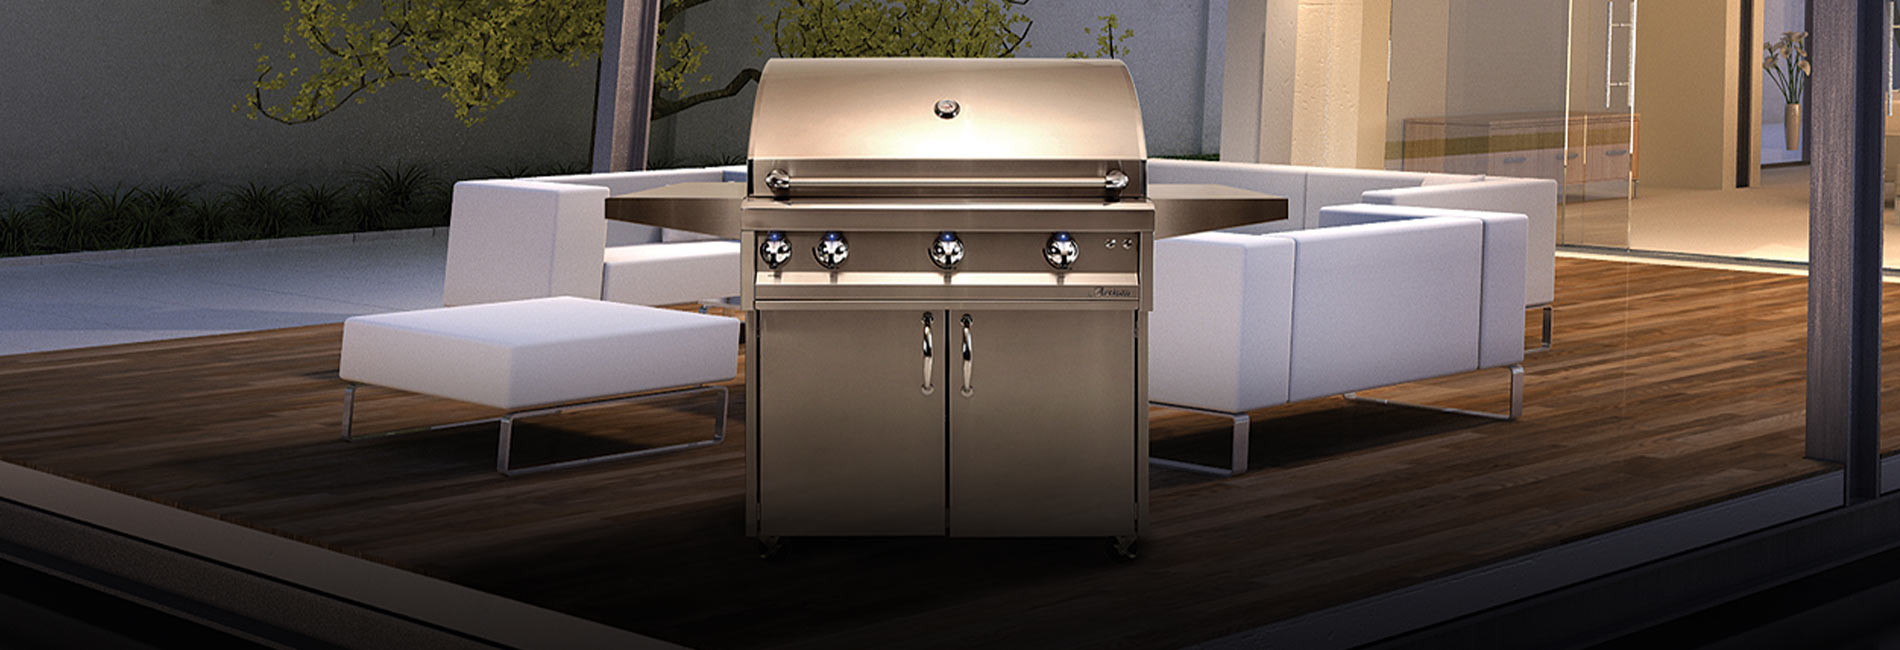 Artisan Professional Series Built in GAS Grill in in Stainless Steel, Natural GAS | Size: 36 Inches by Spotix